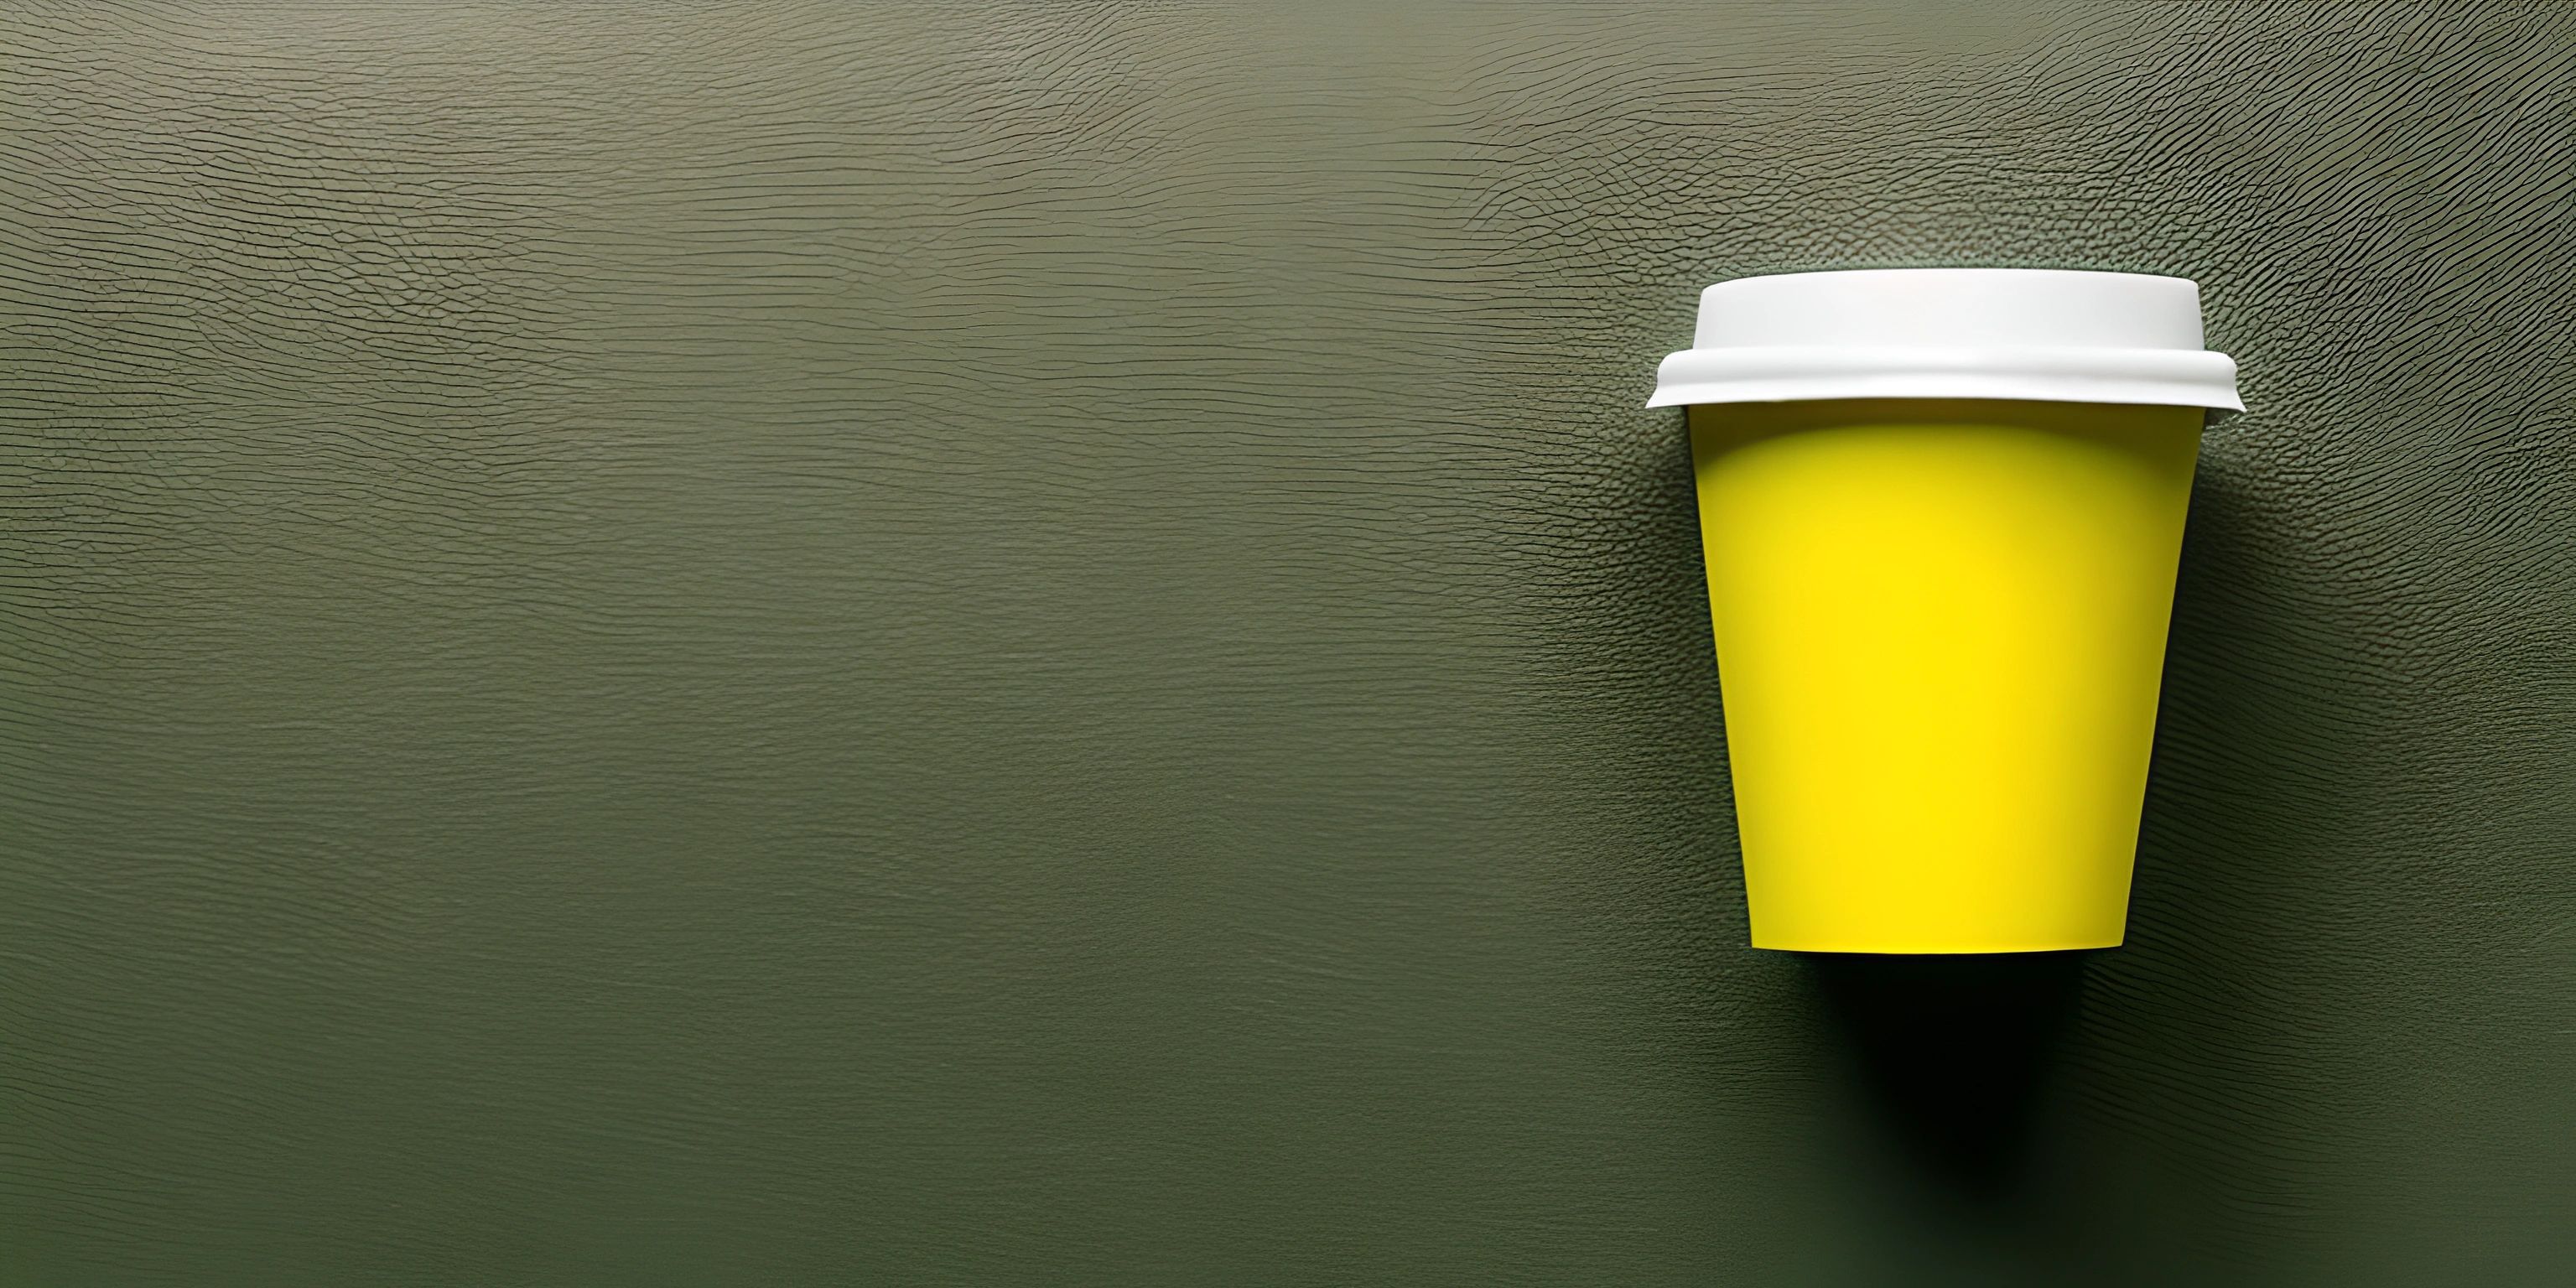 a cup of coffee on a green surface with waves coming up from behind it and on a wall, there is only a light